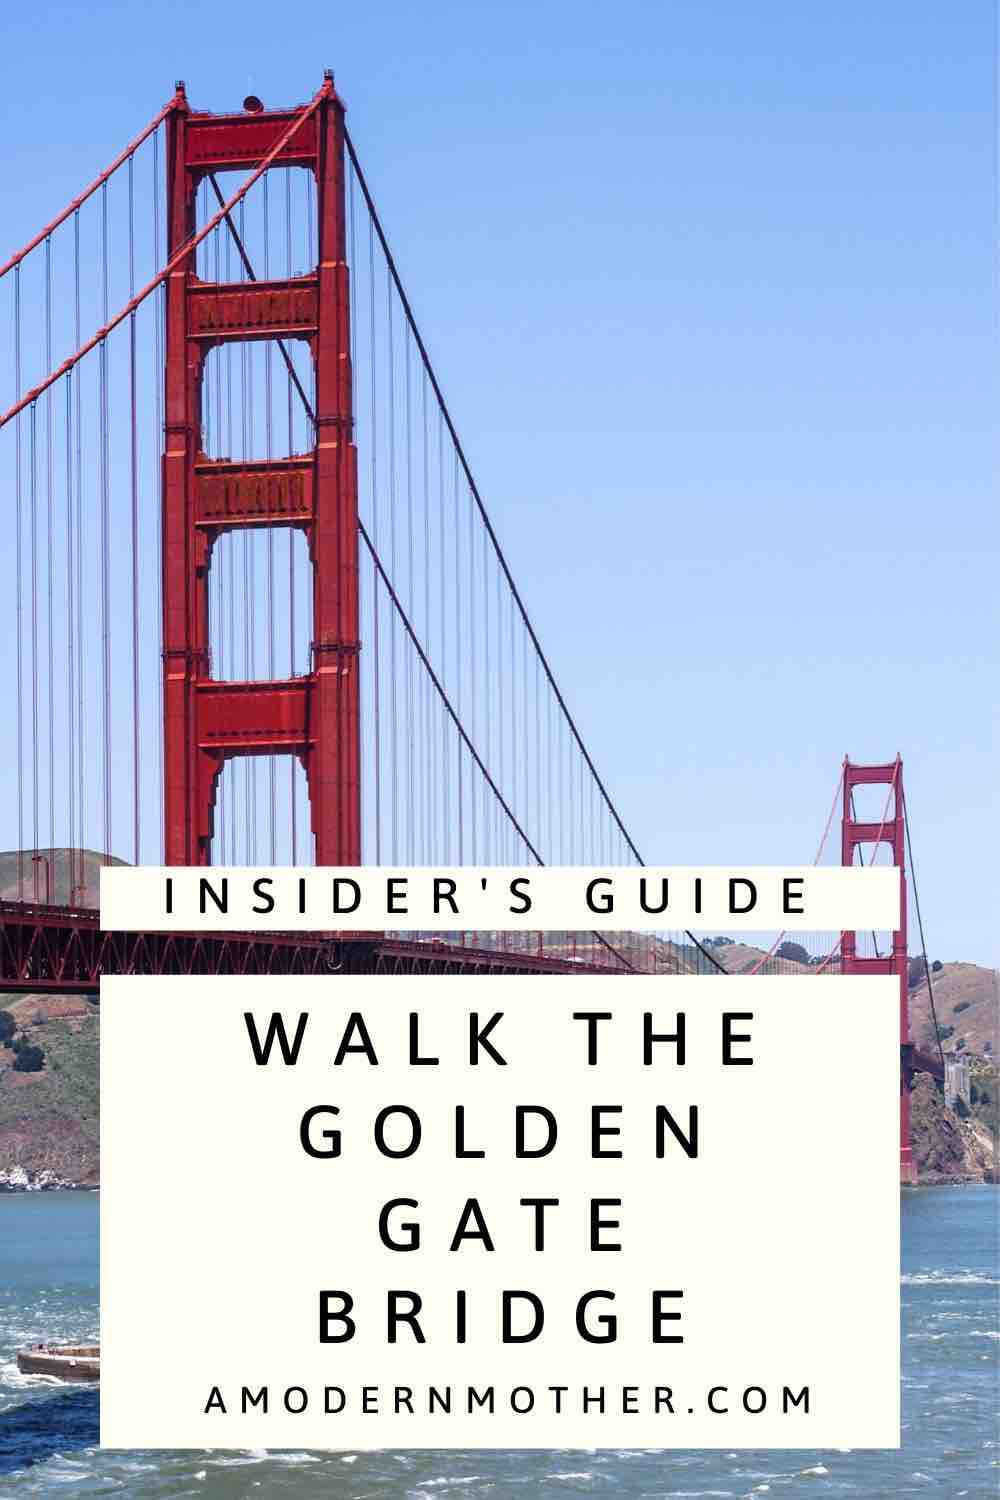 How to walk the golden gate bridge, including where to park, how long it takes, can you walk to Sausalito, where to eat, are there bathrooms and more!